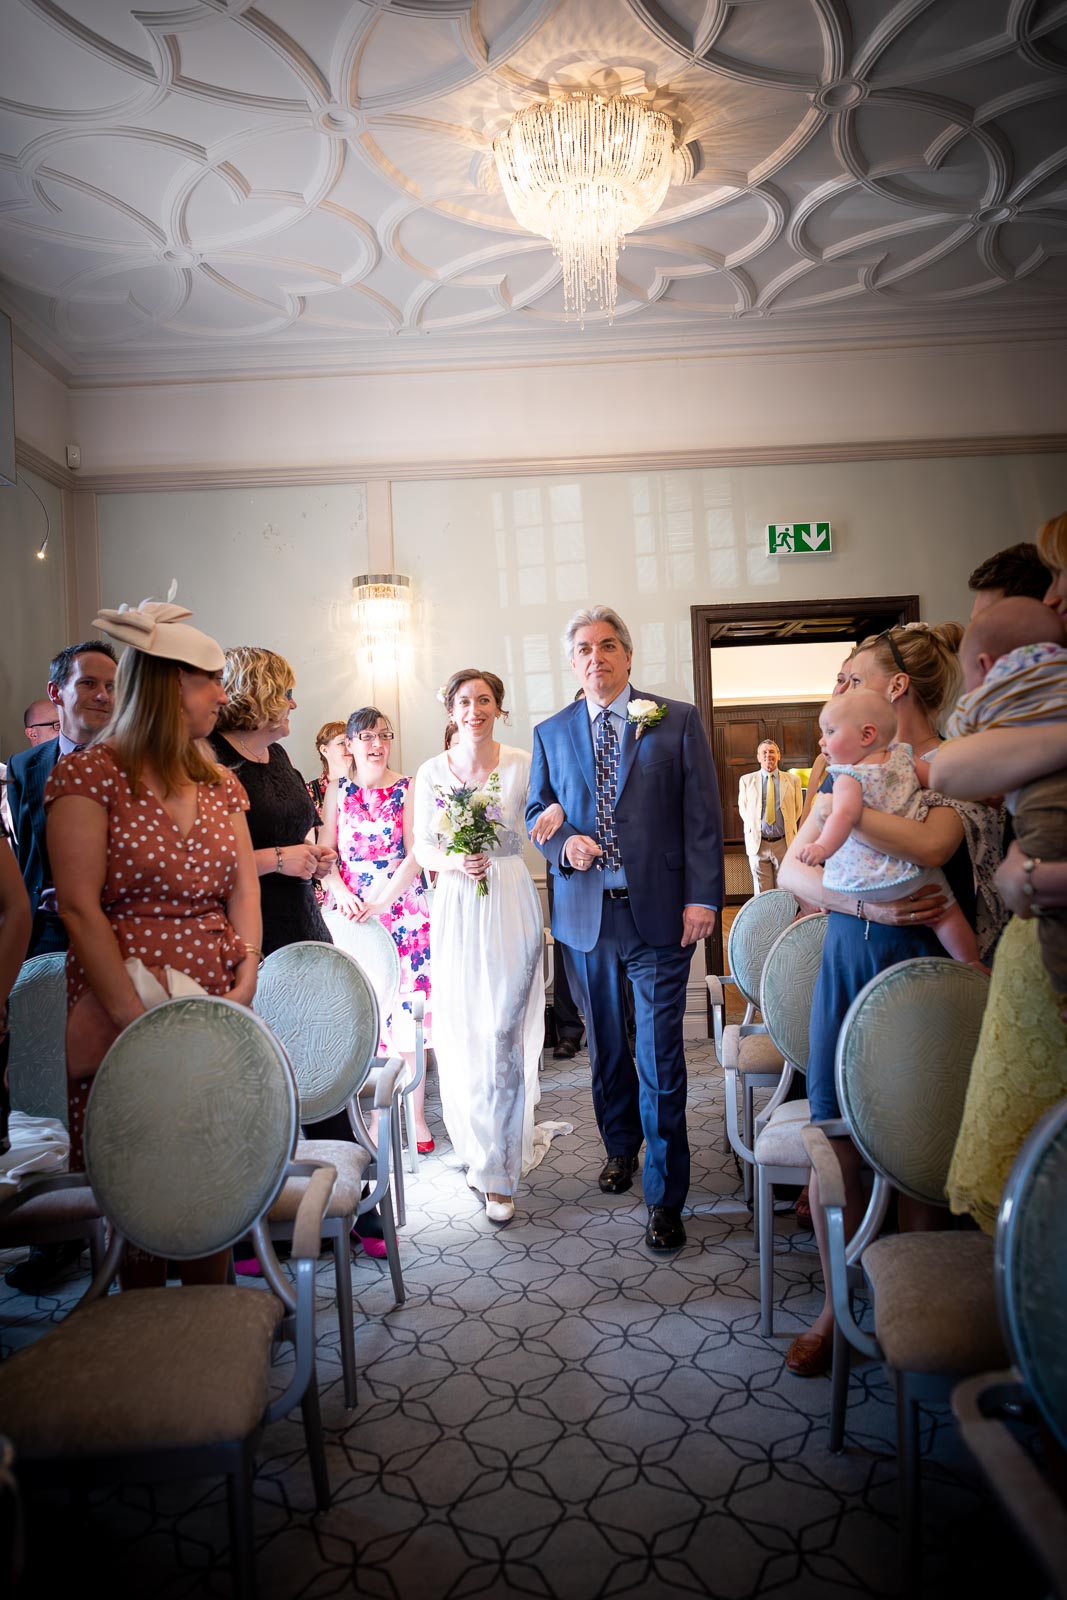 Alexis walks down the aisle accompanied by her Dad before her wedding in the Ainsworth Room at Lewes Registry Office before his wedding.